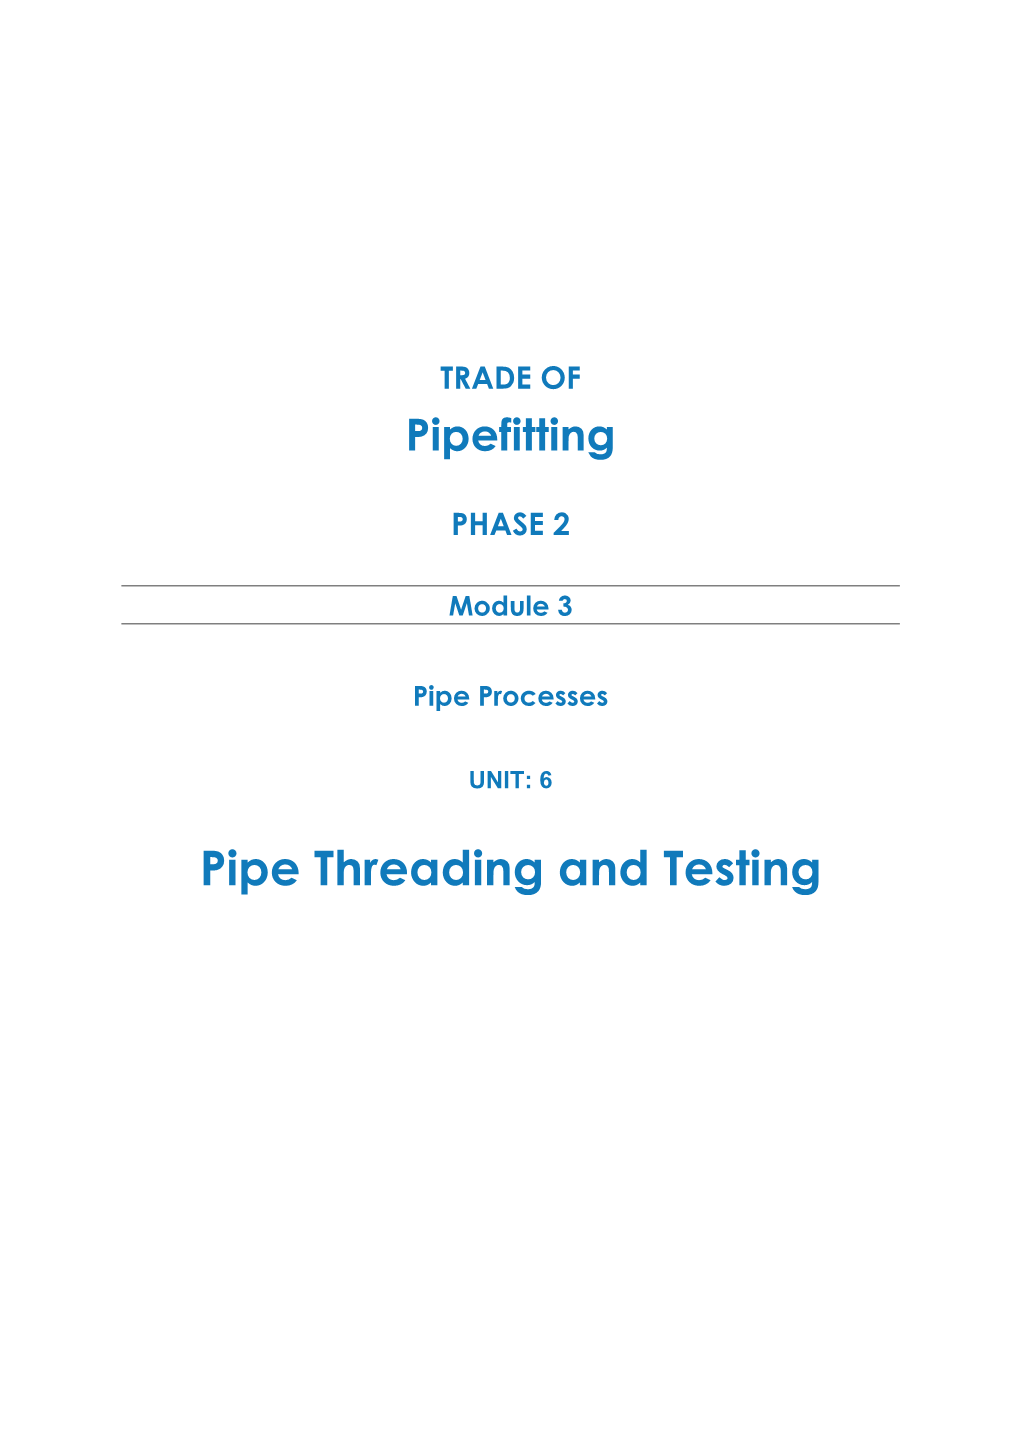 Pipe Threading and Testing